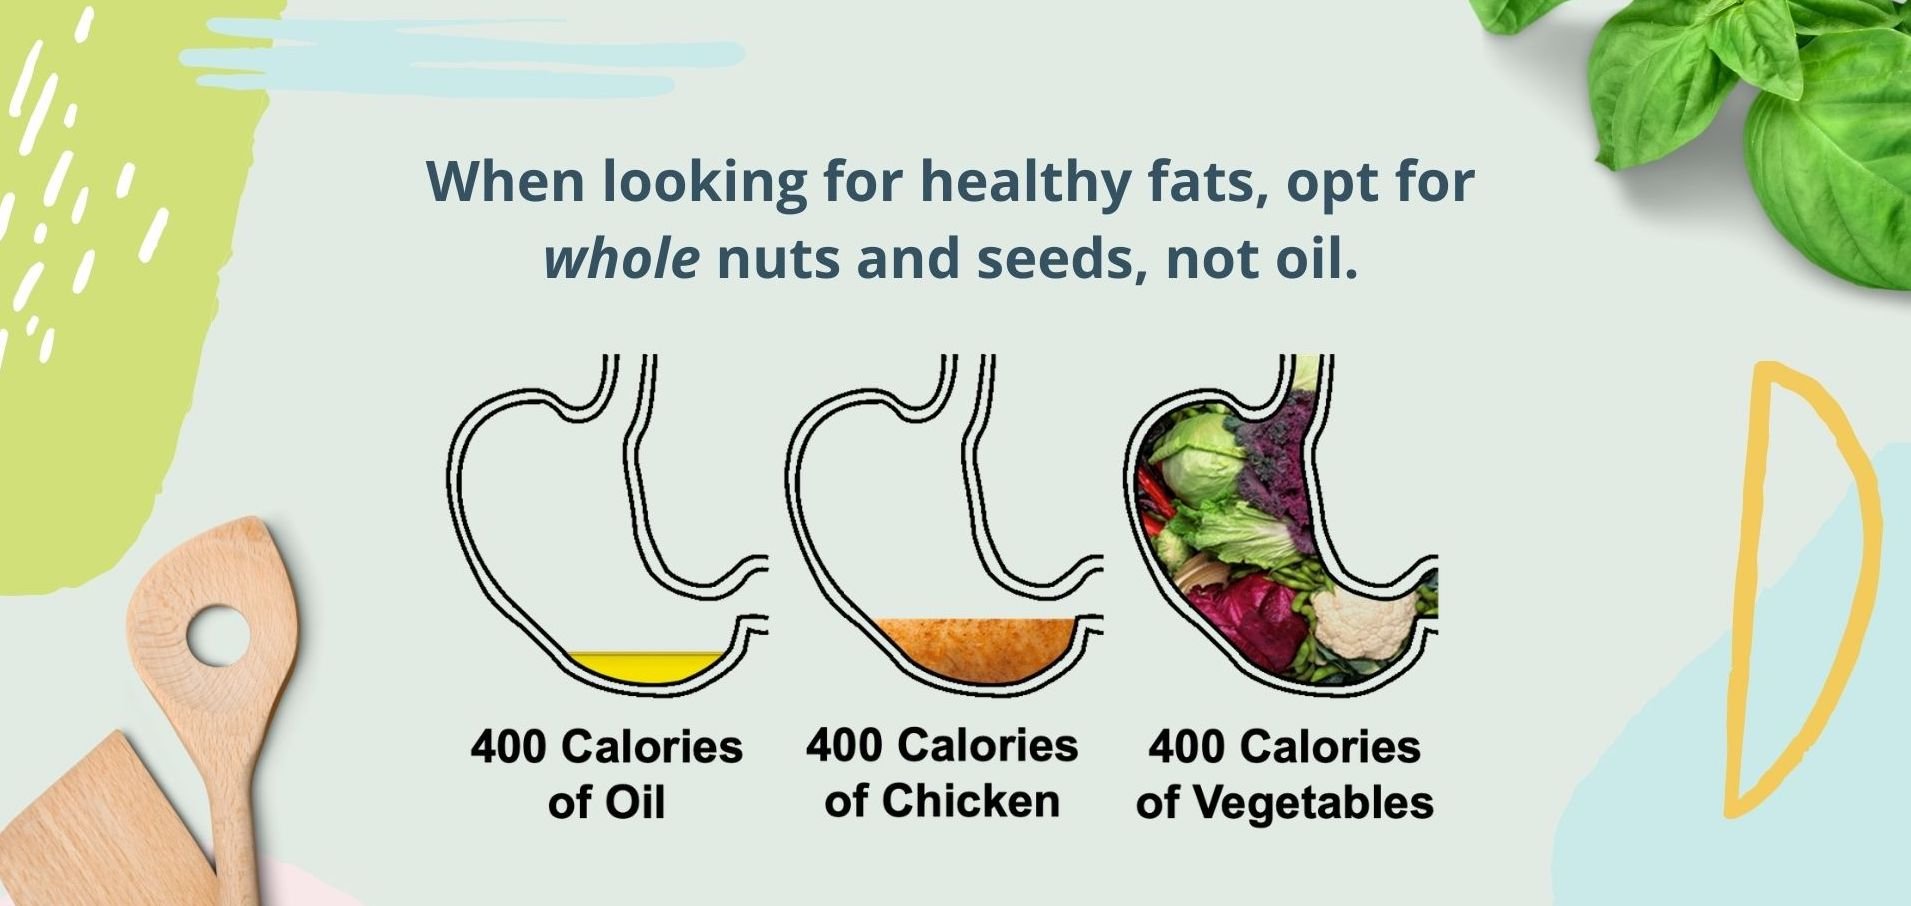 Illustration comparing 400 calories of oil, chicken, and vegetables